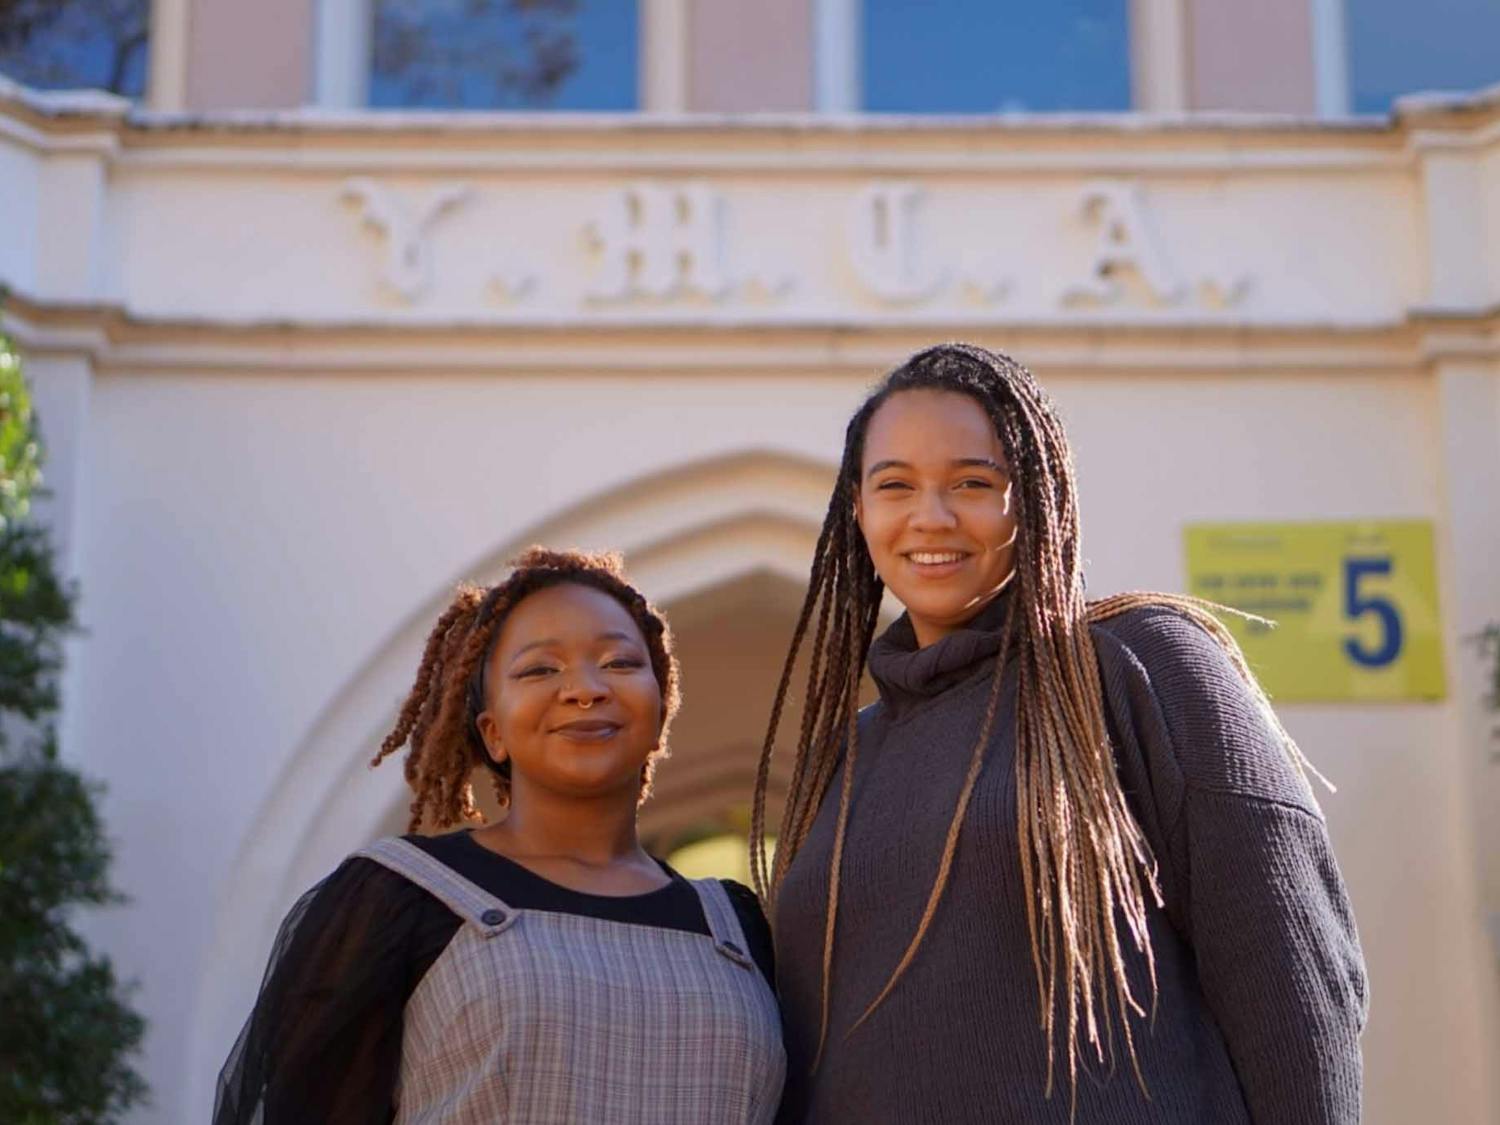 Patrice McGloin, a junior majoring in Psychology and Public Policy with a minor in Chinese, and Montia Daniels, junior double majoring in Women and Gender Studies and Media and Journalism are the new presidents of the Campus Y.